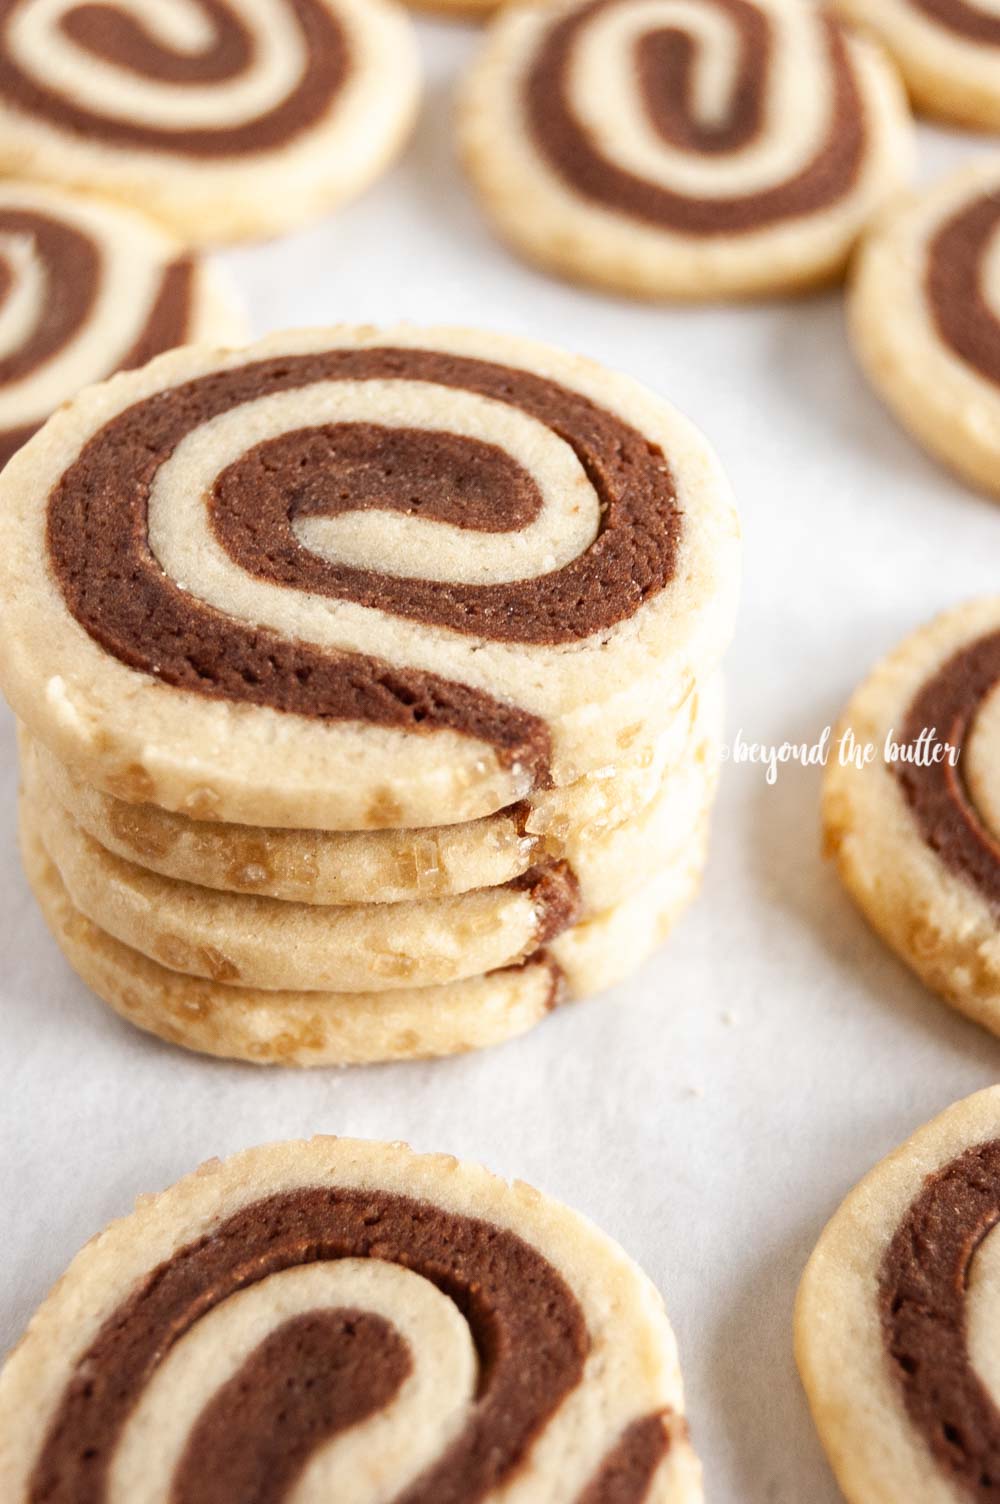 Close up image of small stack of Chocolate Pinwheel Cookies | All images © Beyond the Butter™